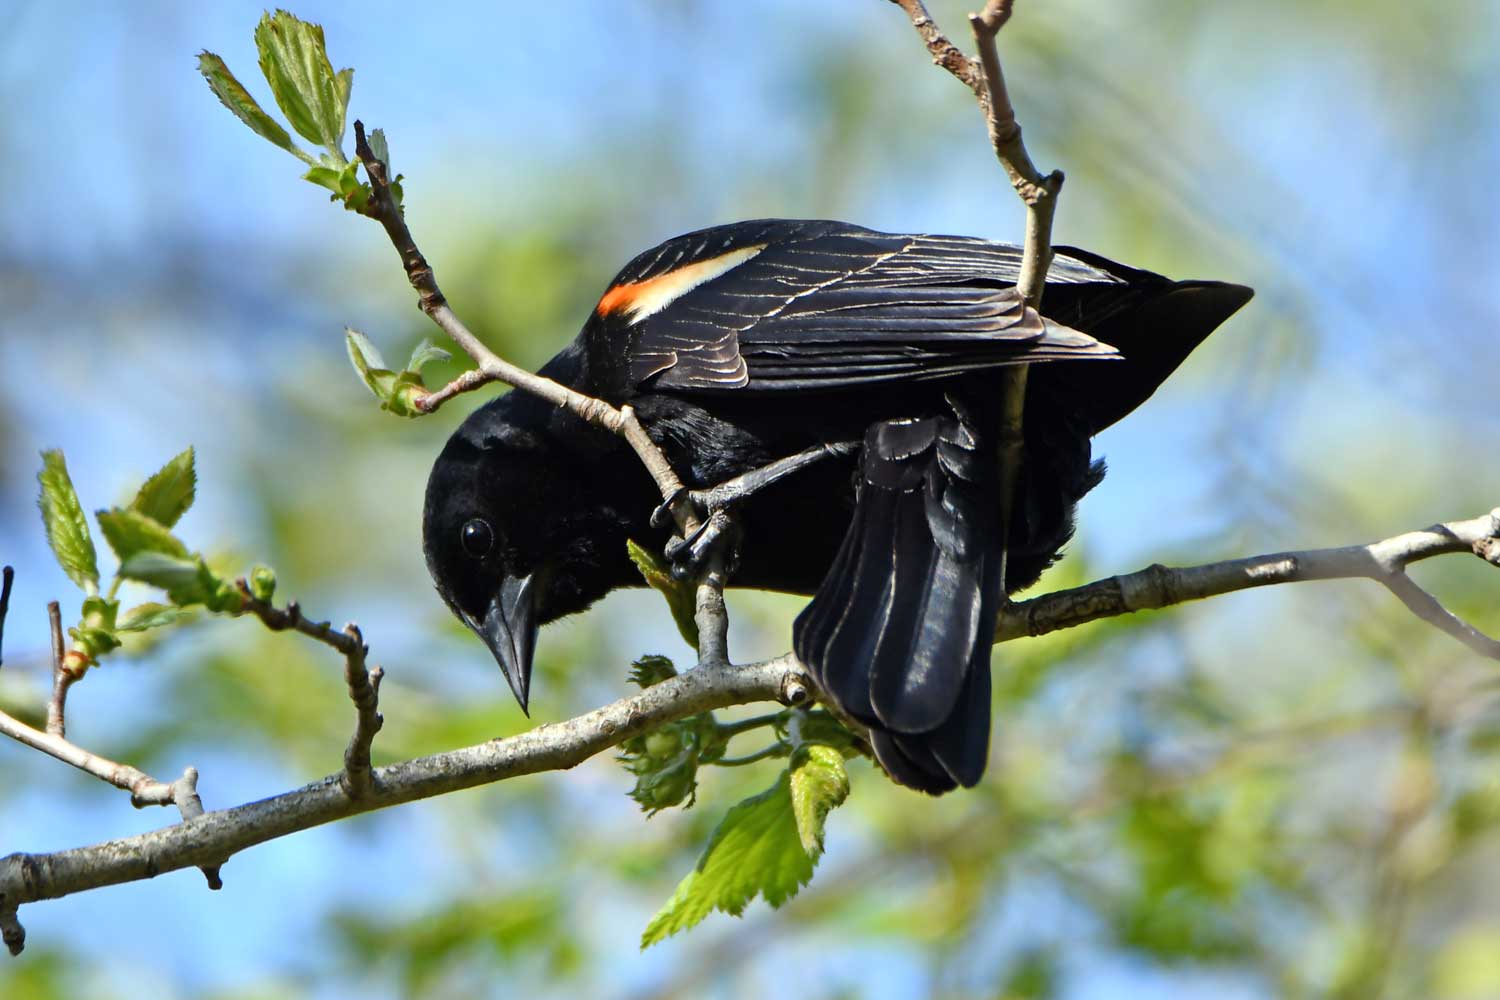 Male red-winged blackbird perched on a twig.